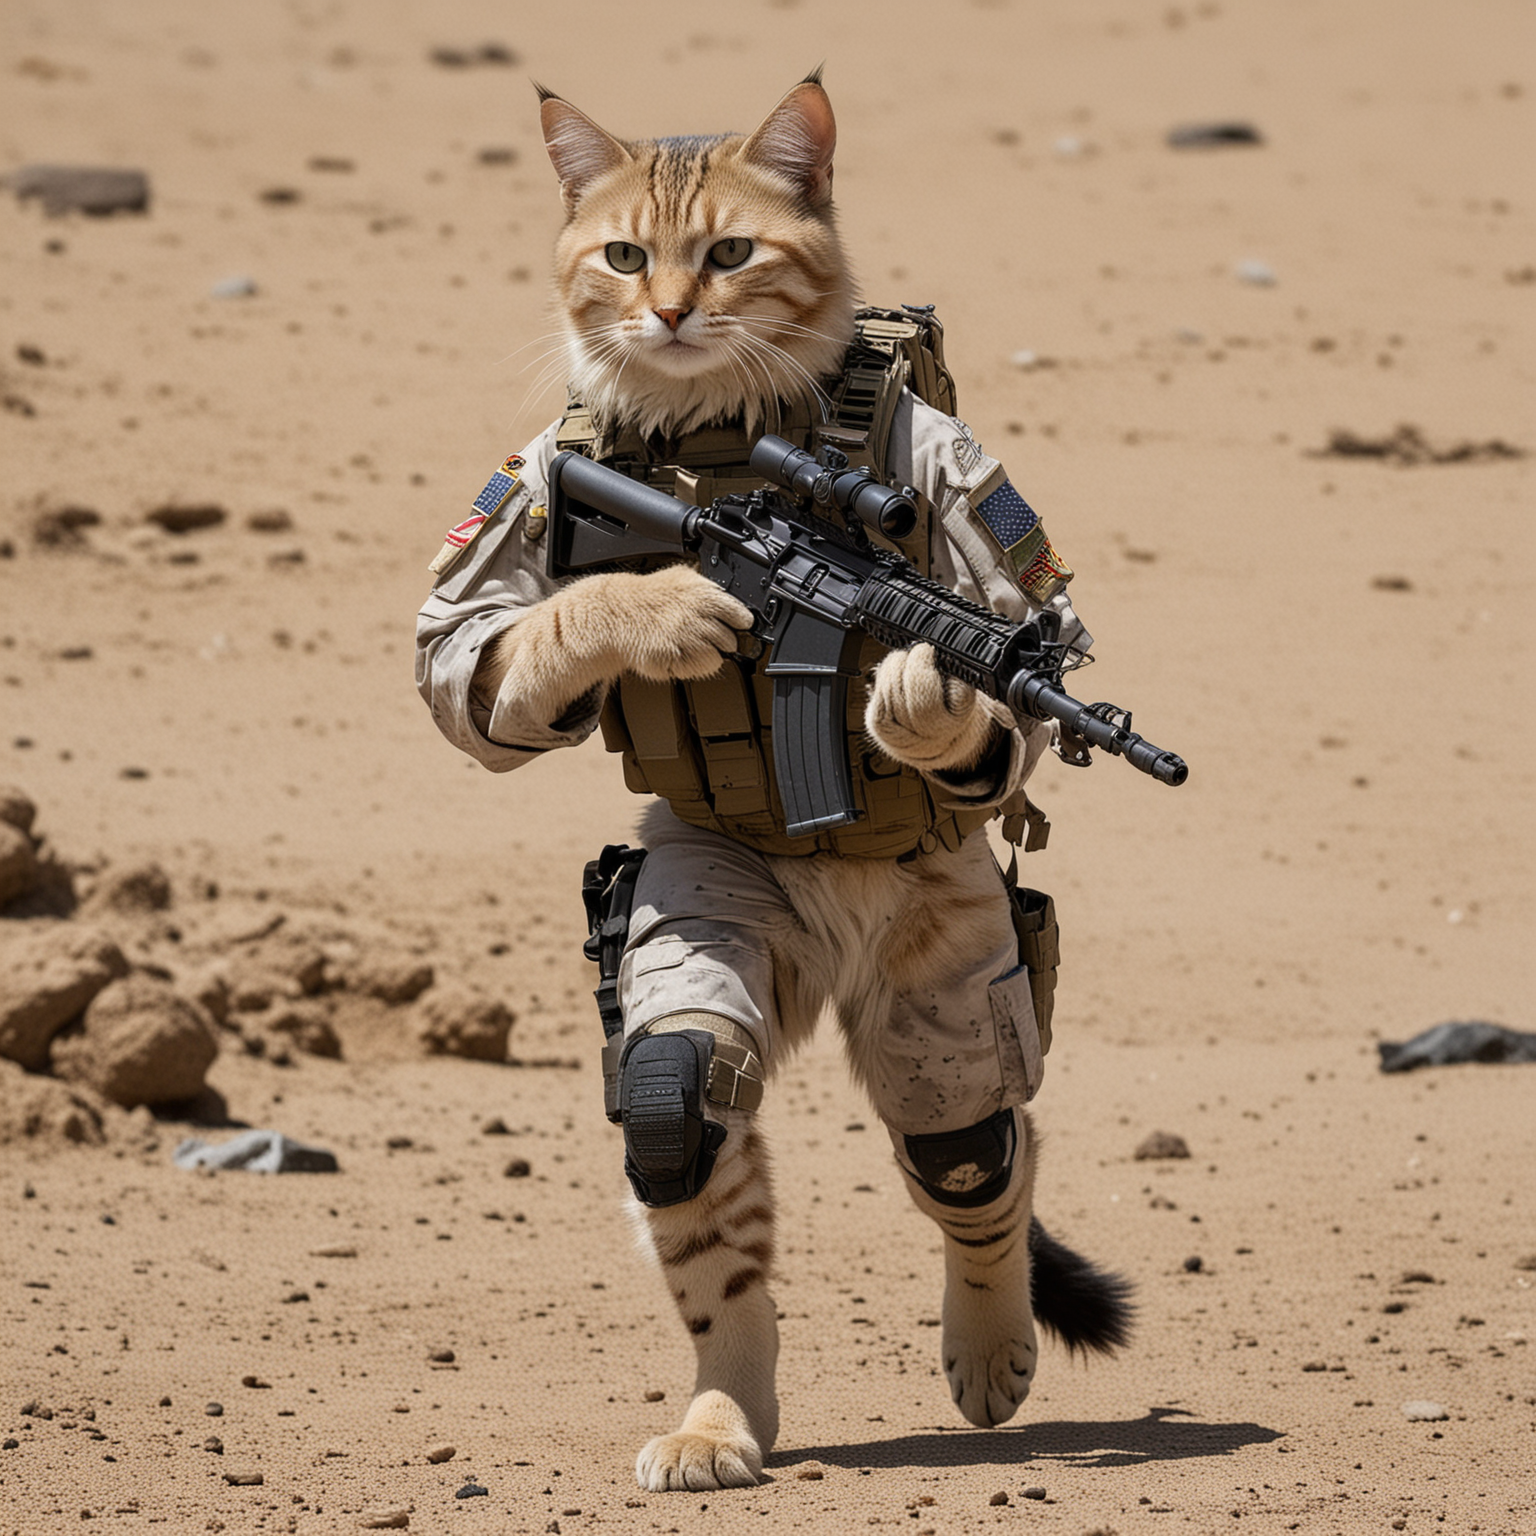 Navy Seal Humanoid Cats on Covert Mission